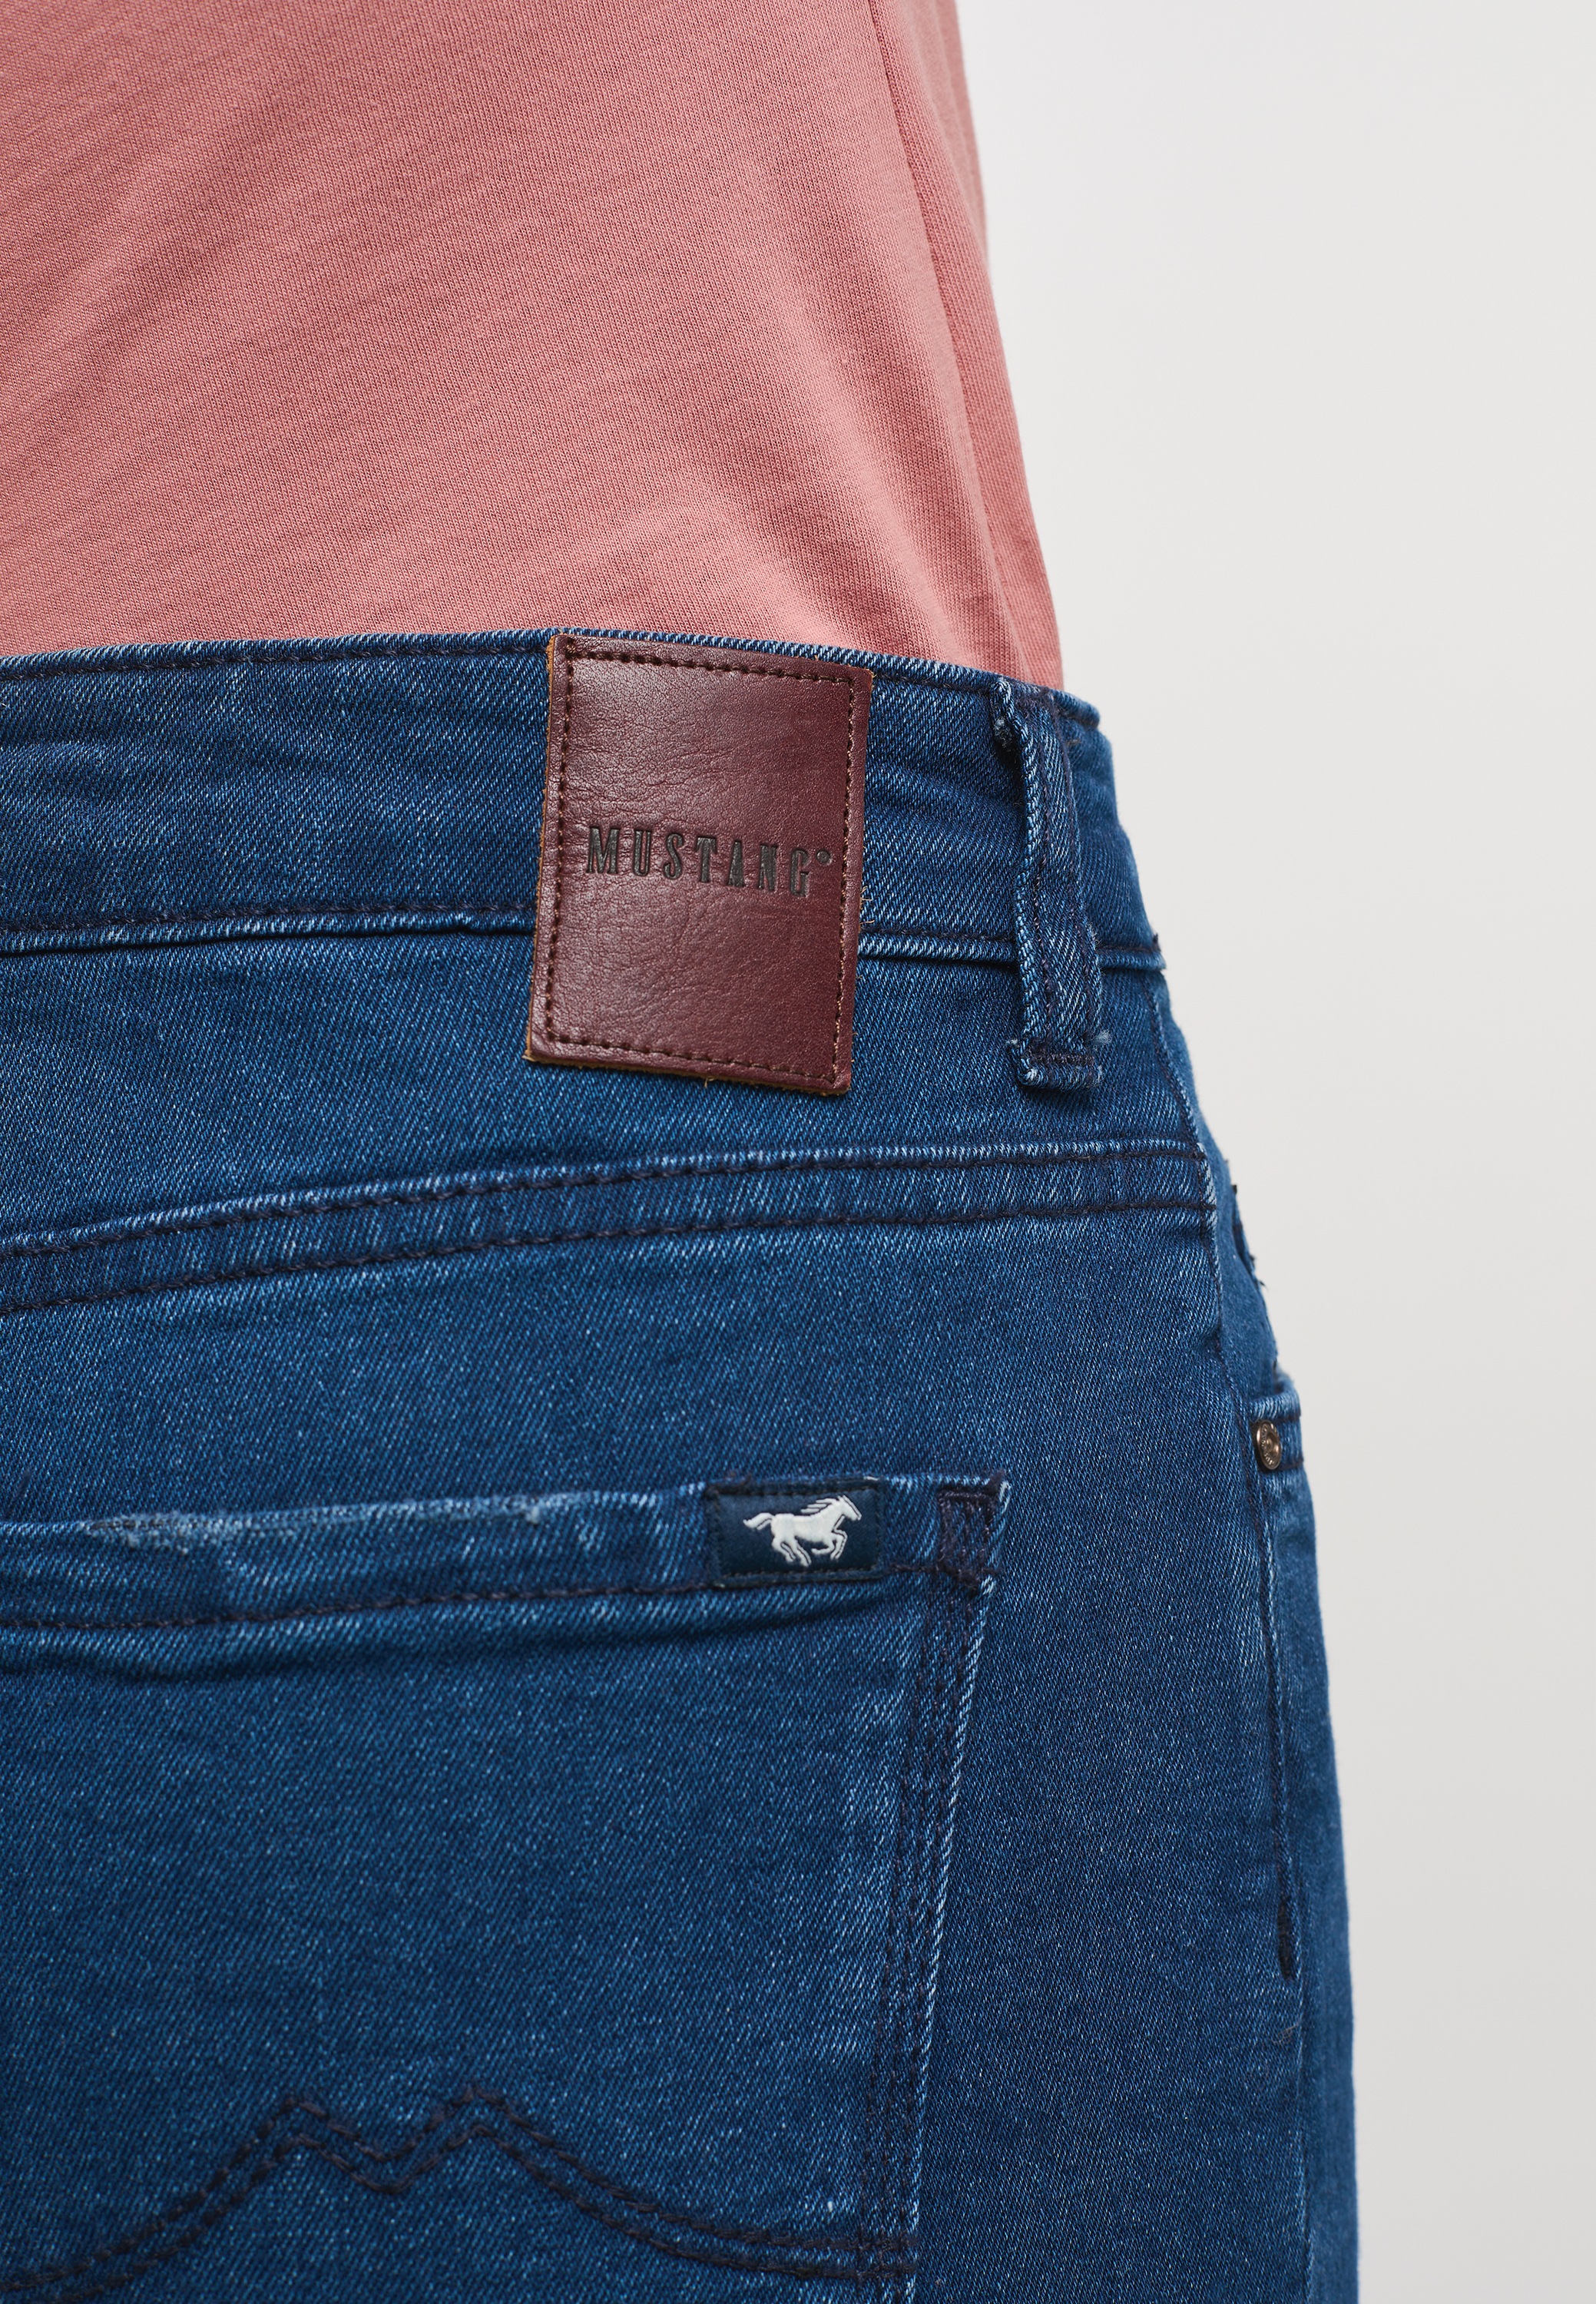 MUSTANG 5-Pocket-Jeans Slim Mustang Crosby Style »Mustang Crosby Slim«, Style bestellen Hose Relaxed Relaxed